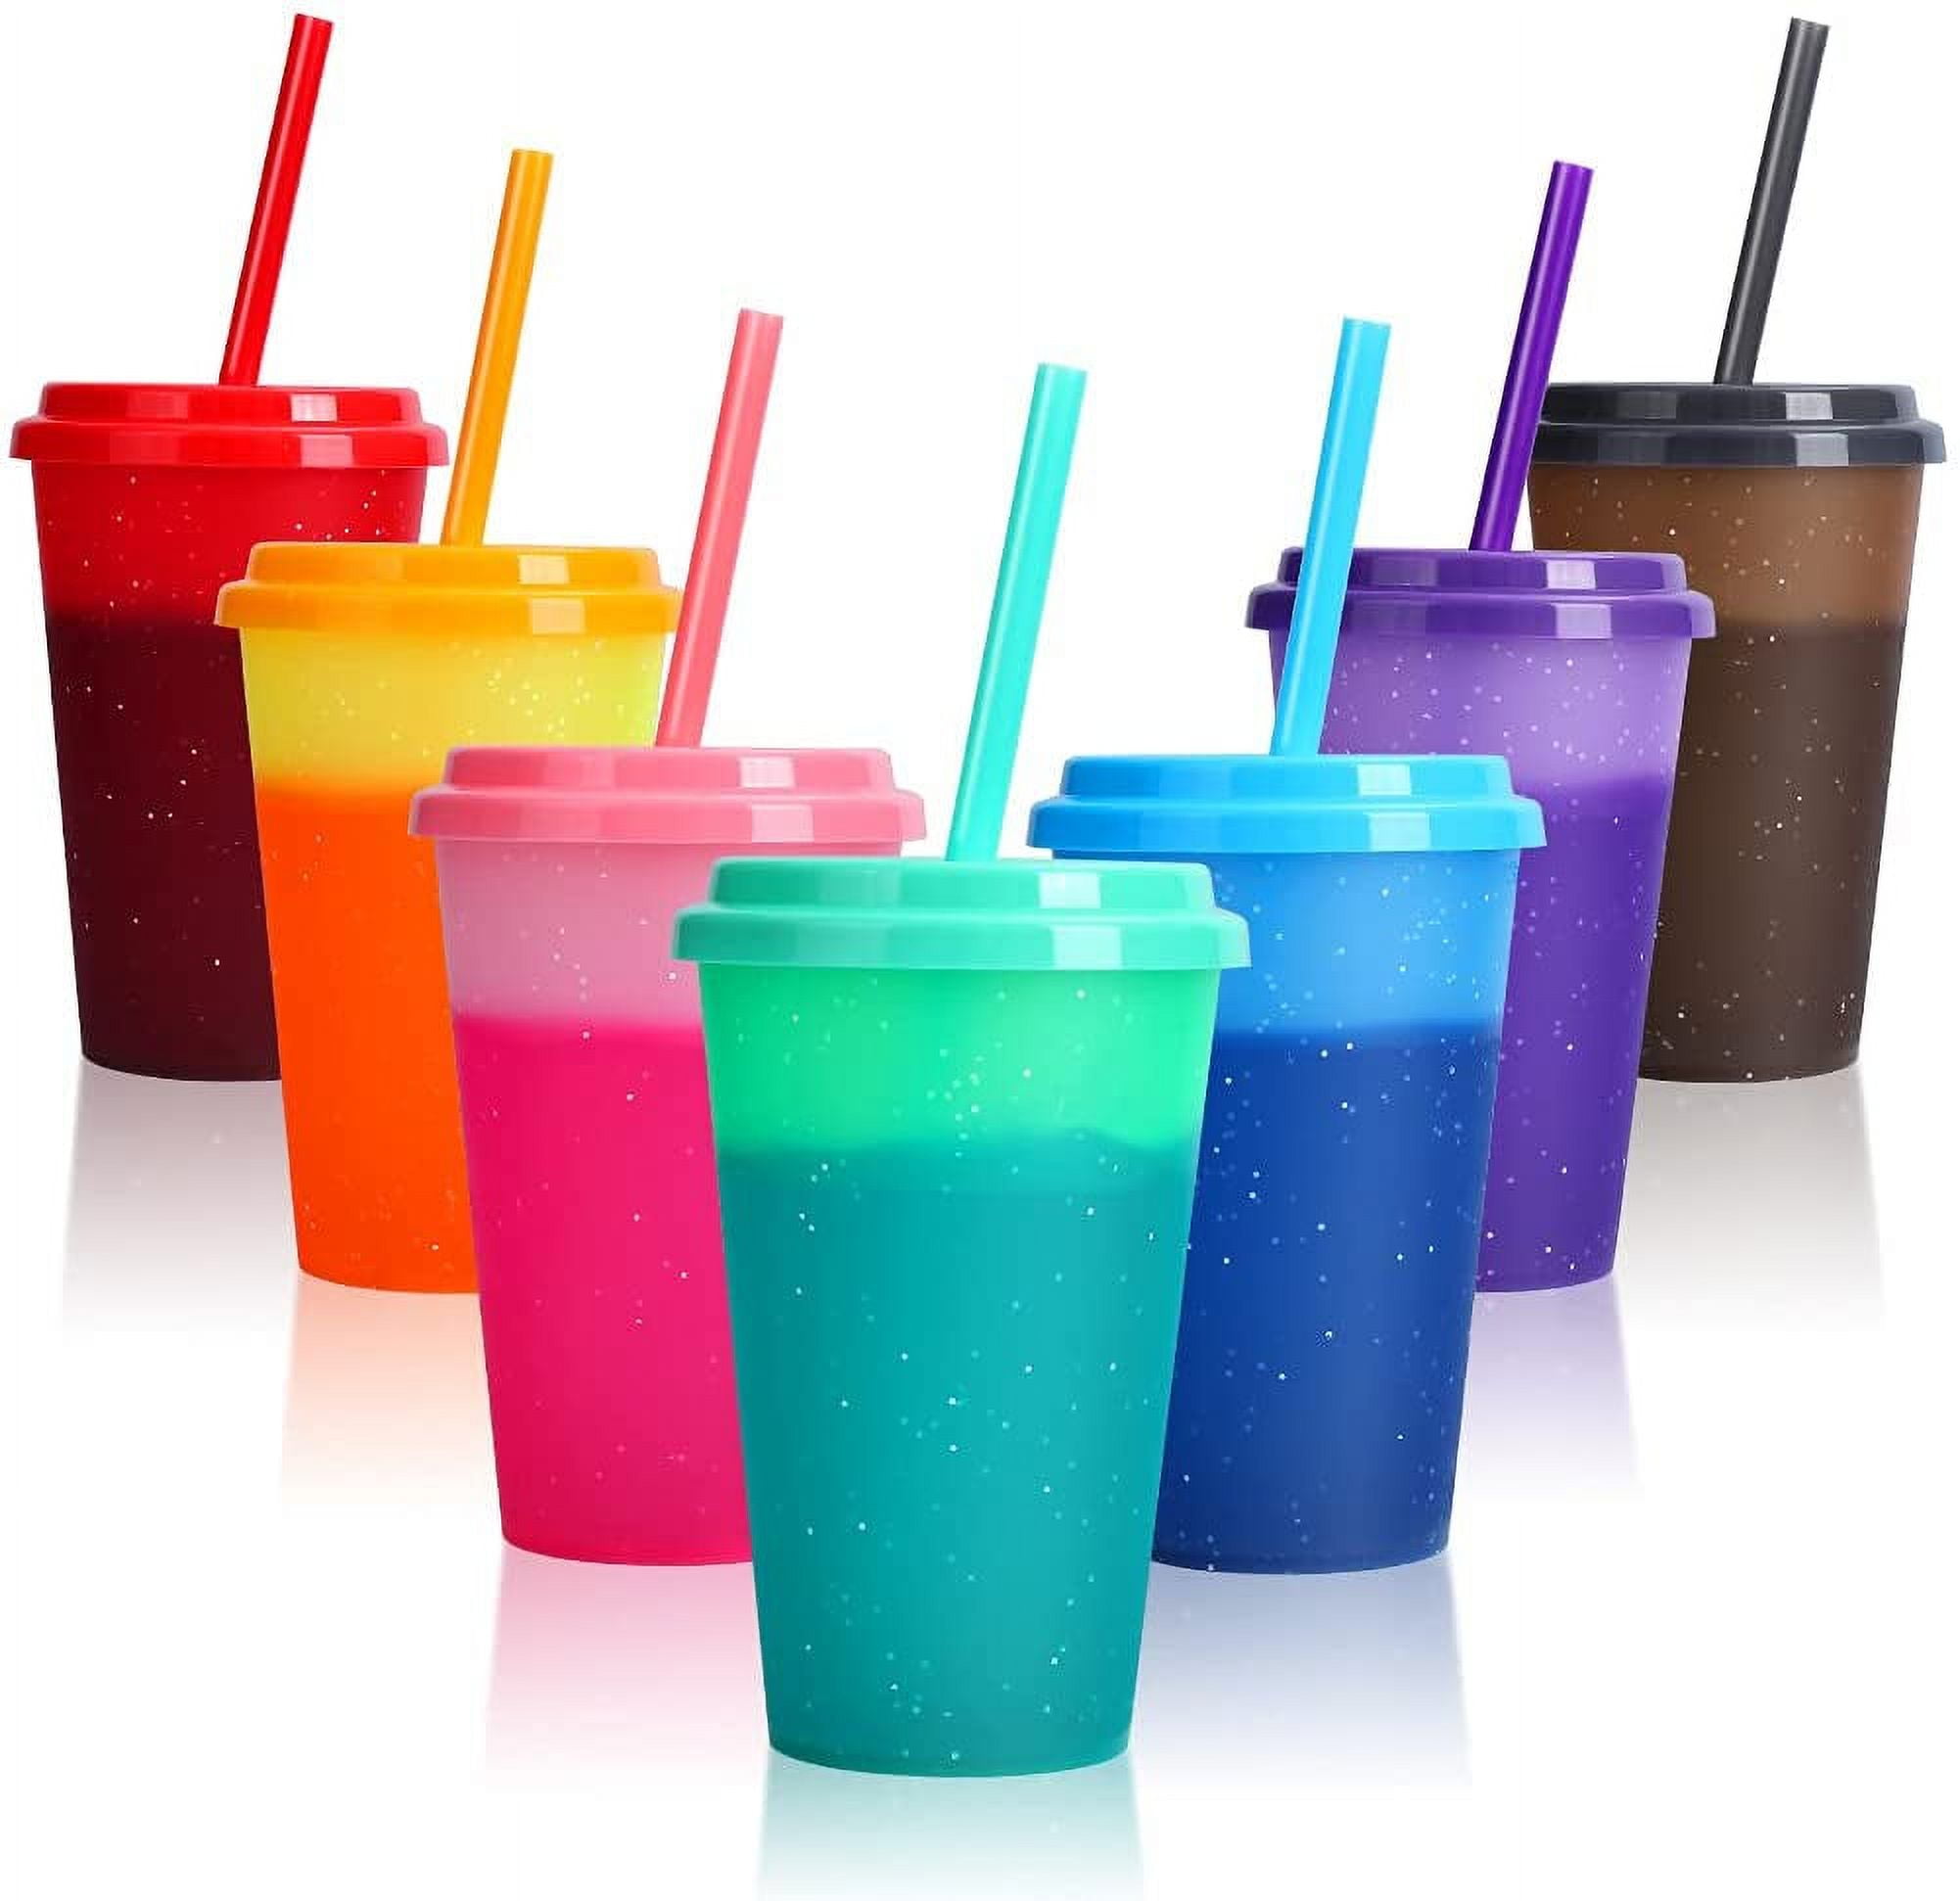 Artrylin Plastic Straw Cups with Lids, 7 Pack 12 oz Reusable